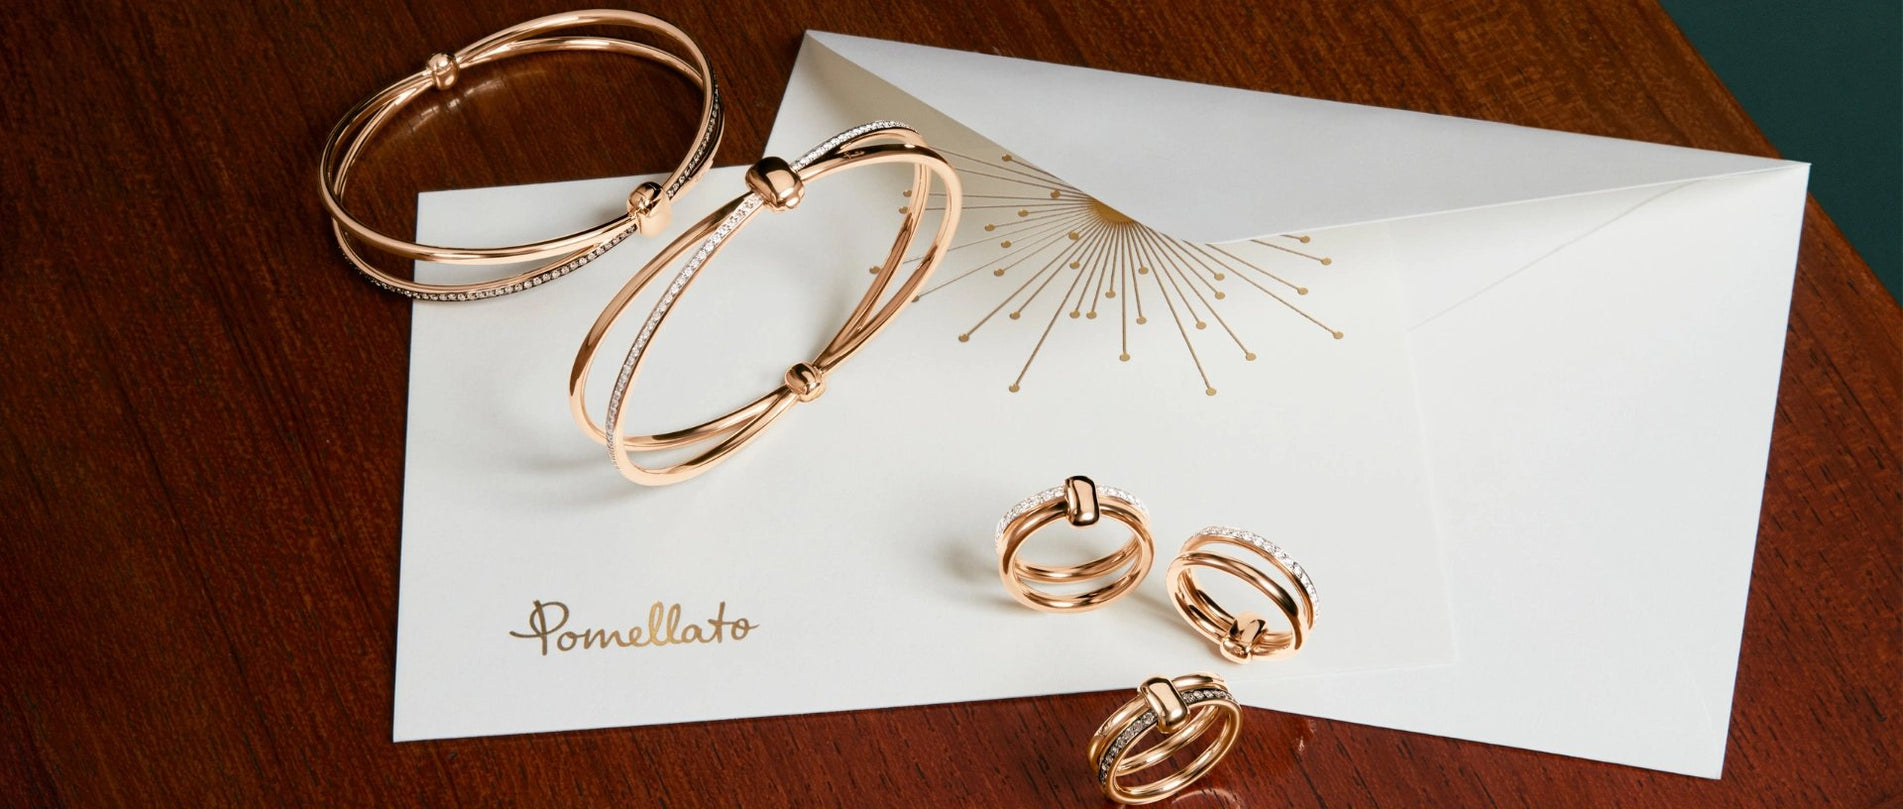 Pomellato Jewellery rings and bangles with diamonds and 18k gold